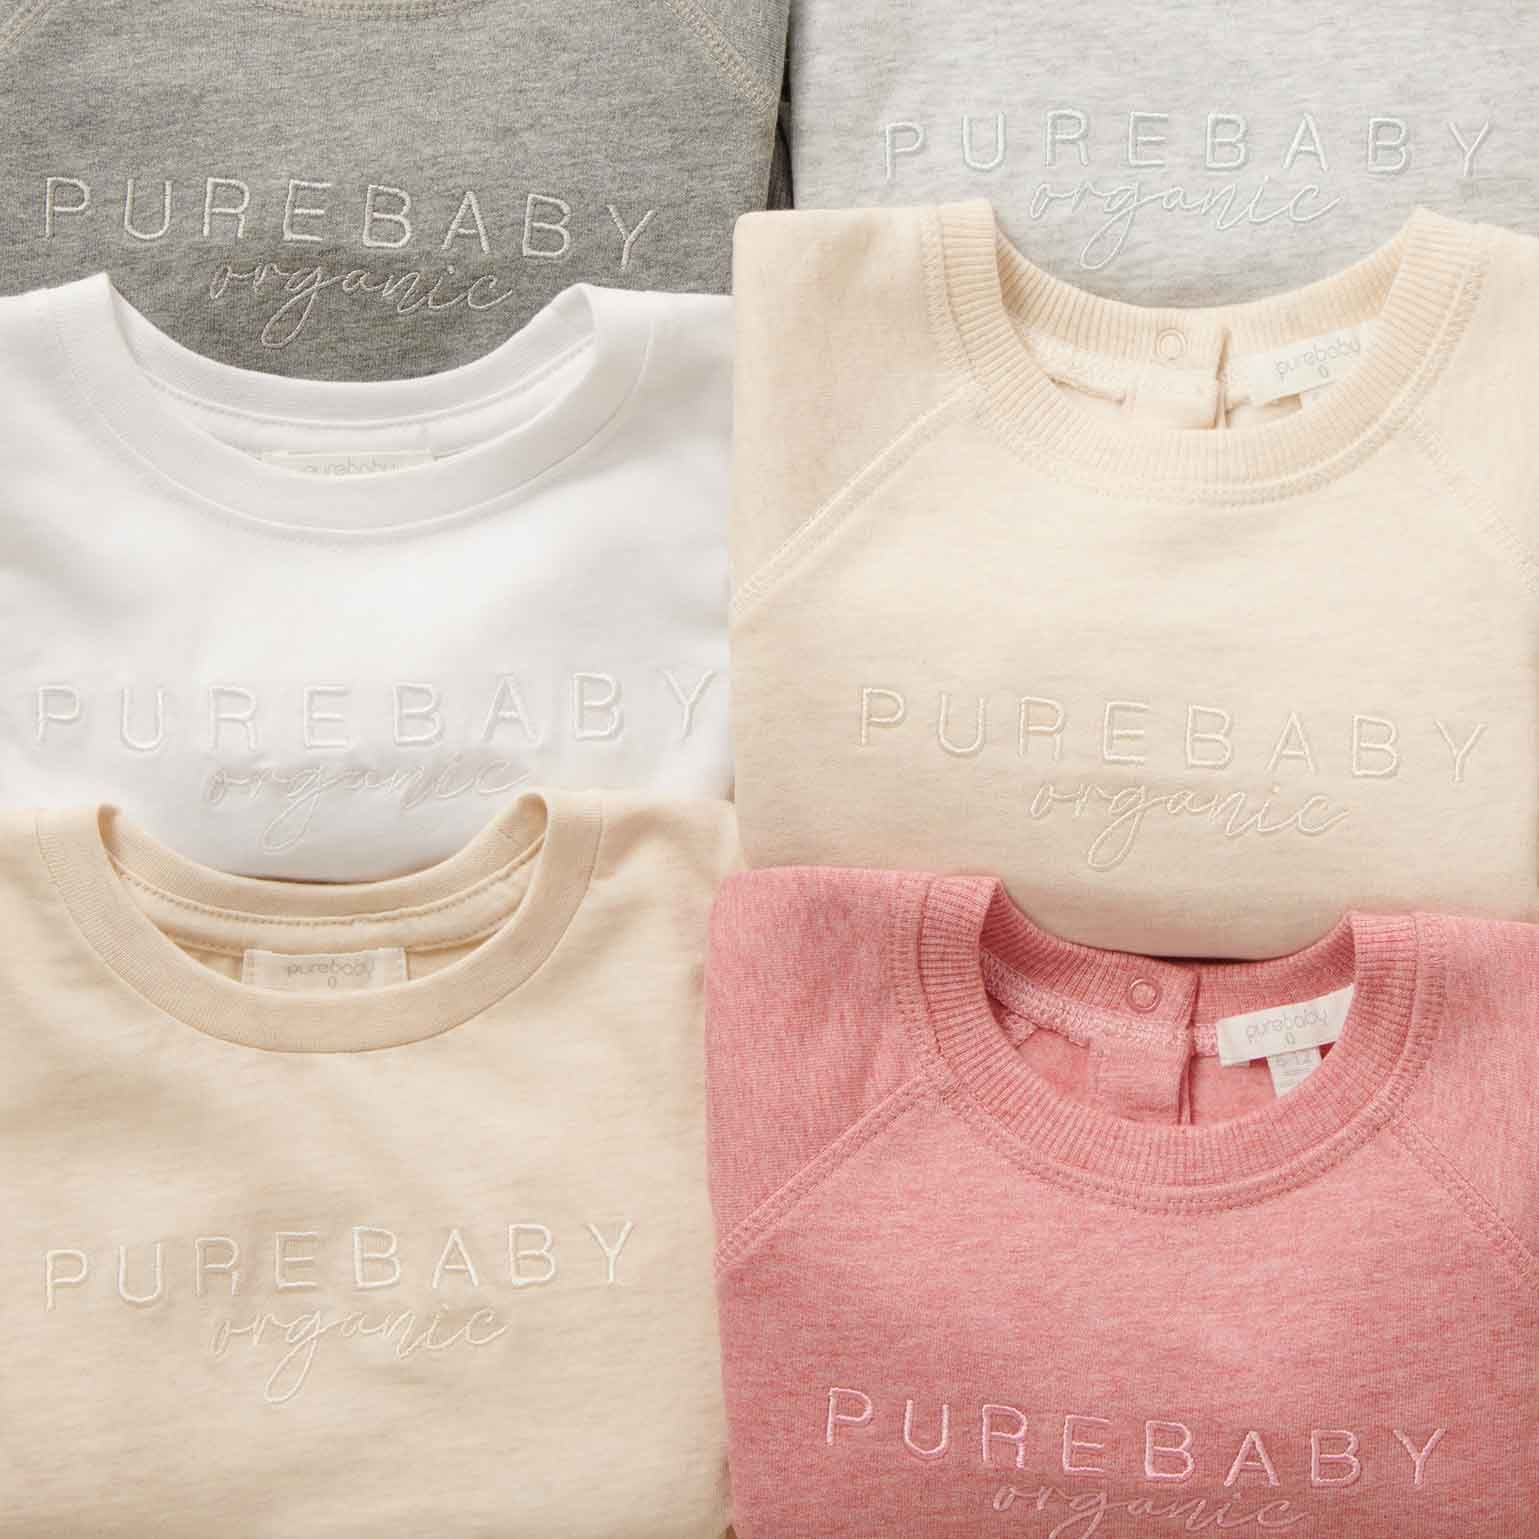 Purebaby jumpers folded up